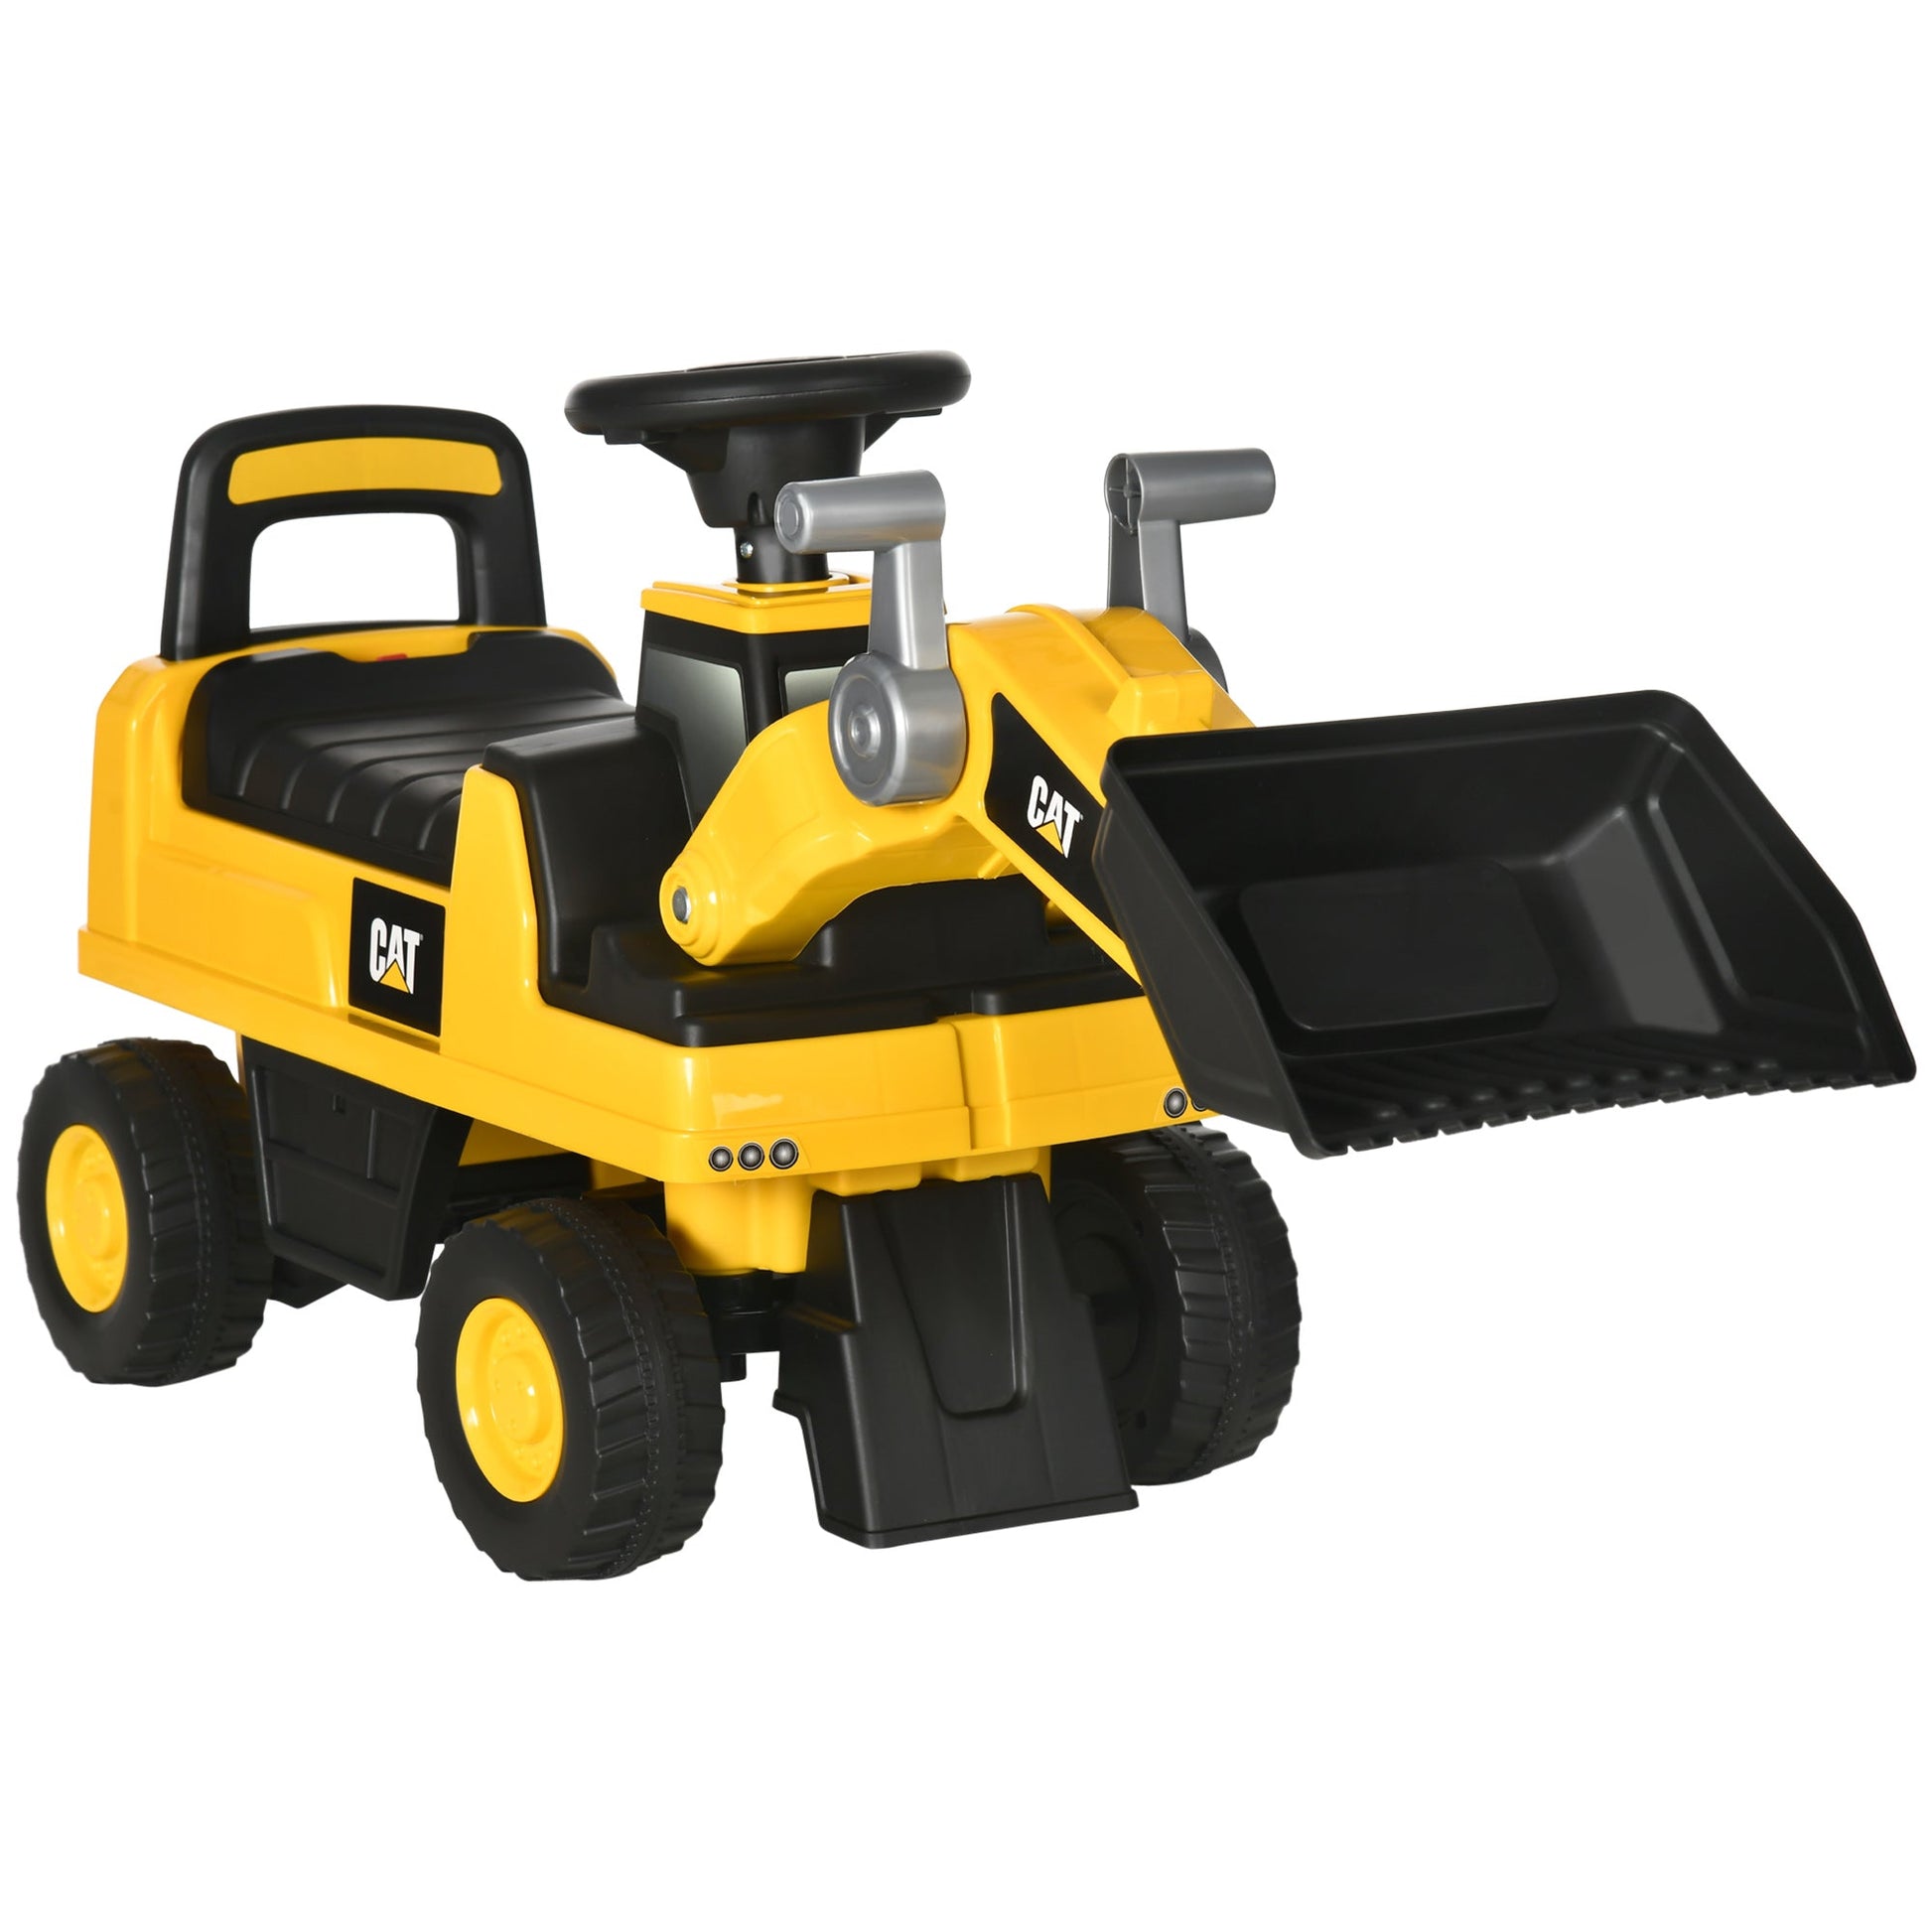 HOMCOM CAT Licensed Kids Ride-On Toy Digger with Manual Shovel & Horn for Ages 1-3 Years - maplin.co.uk